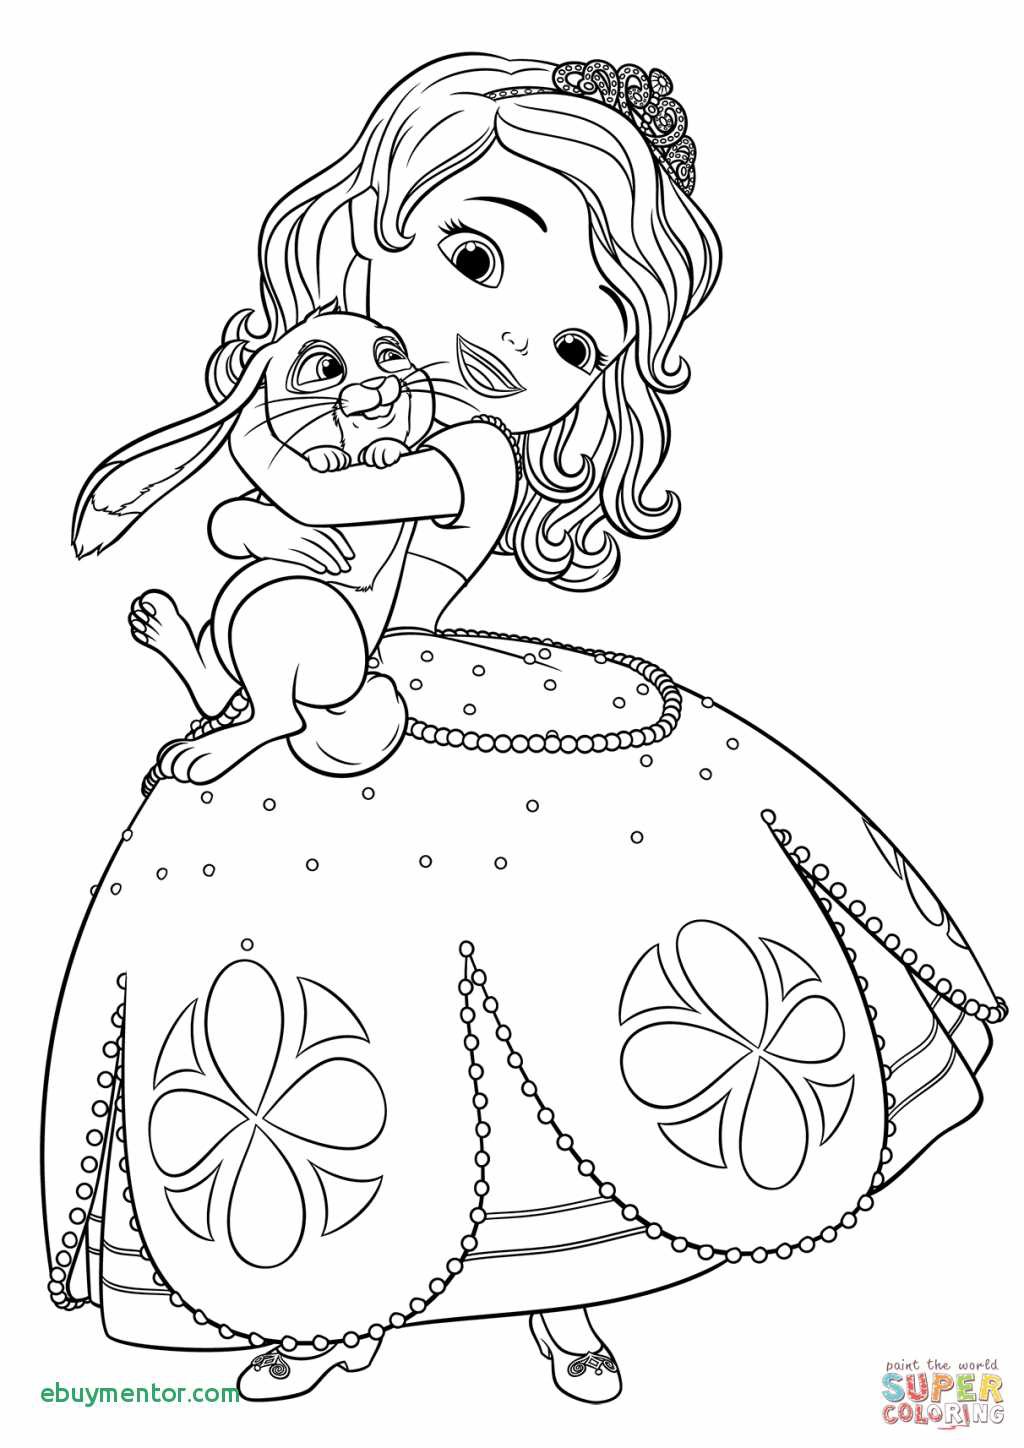 Free Coloring Pages Of Princess sofia Wallpaper